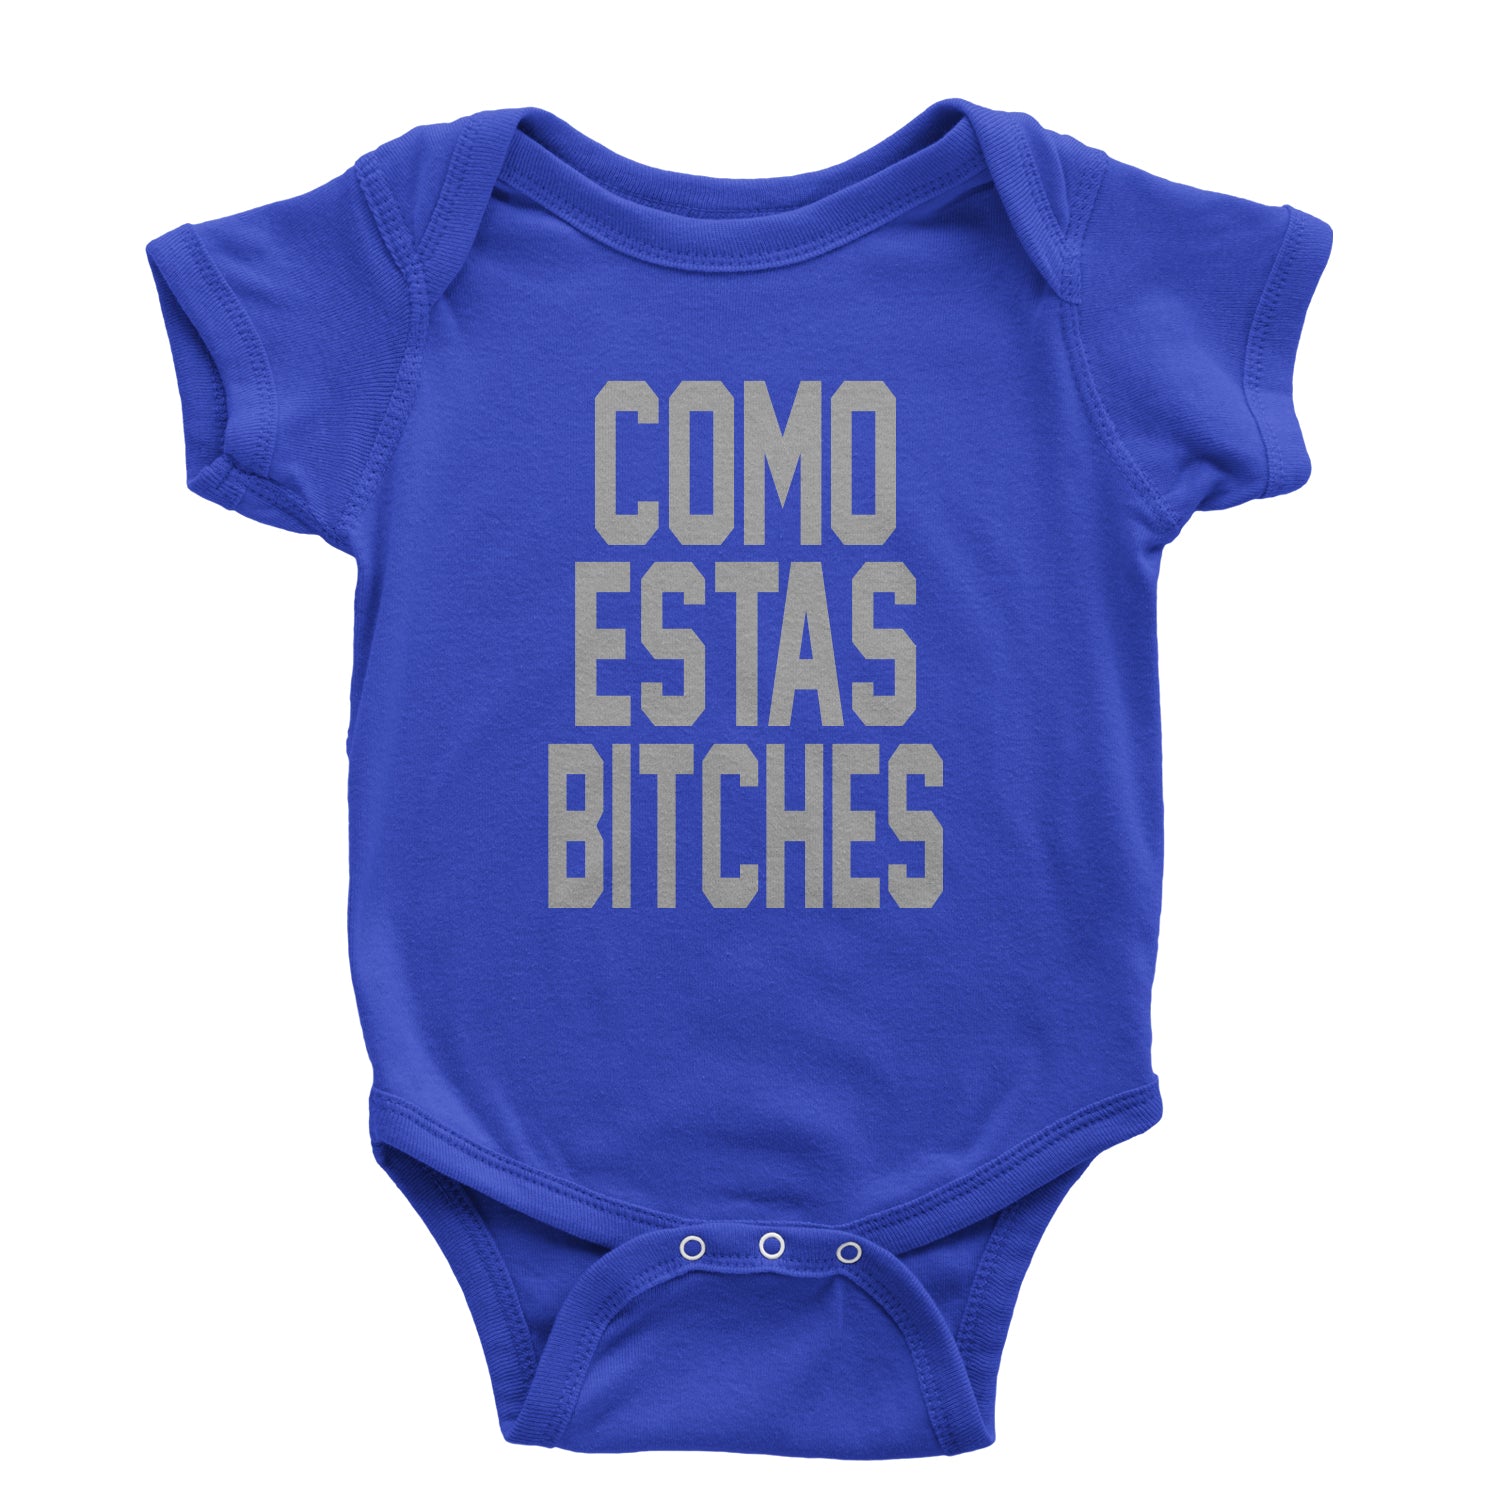 Como Estas B-tches Infant One-Piece Romper Bodysuit and Toddler T-shirt #expressiontees by Expression Tees